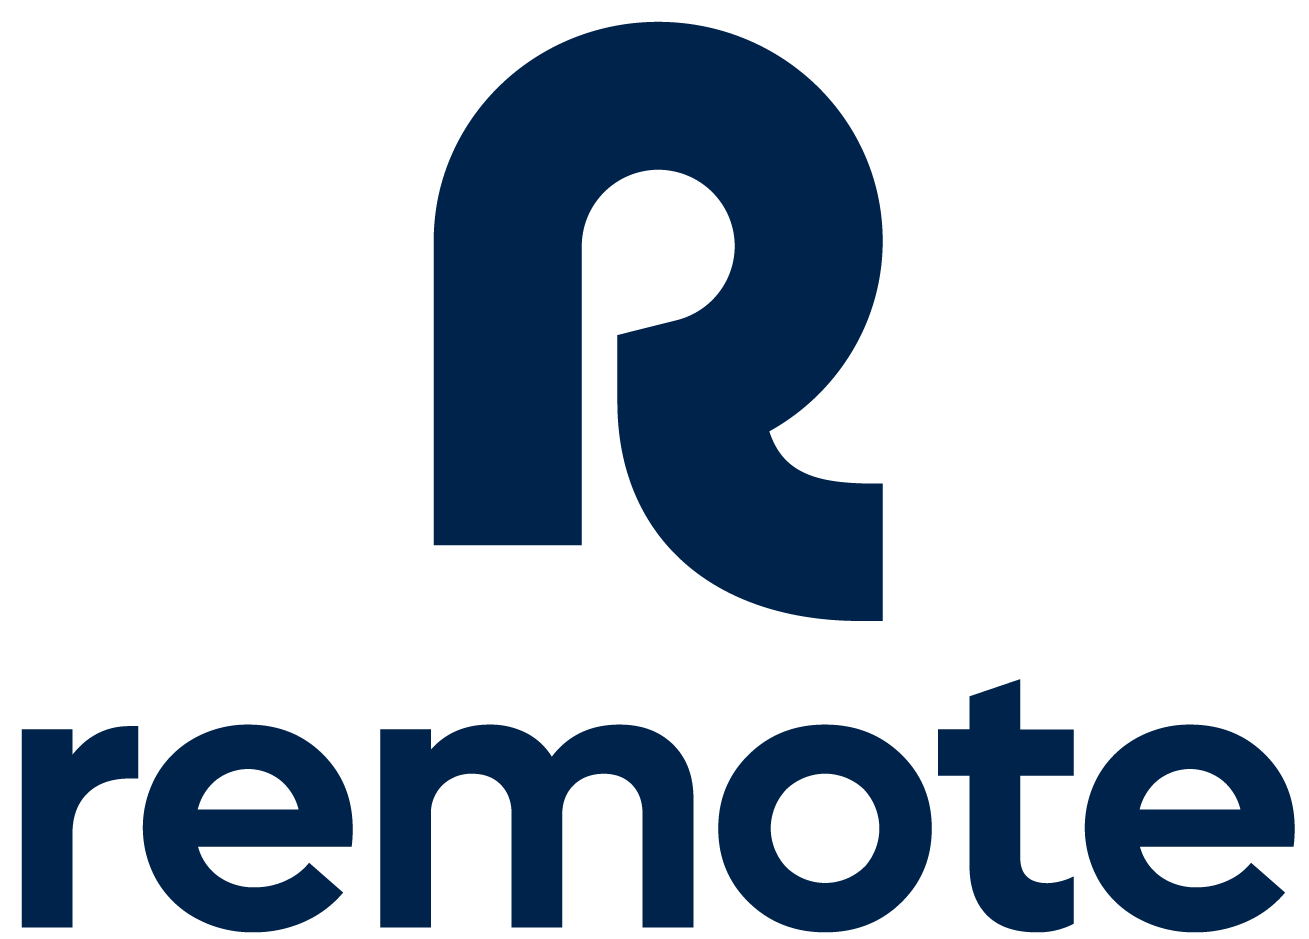 remote for remote teams to hire, onboard, and handle payroll for remote teams